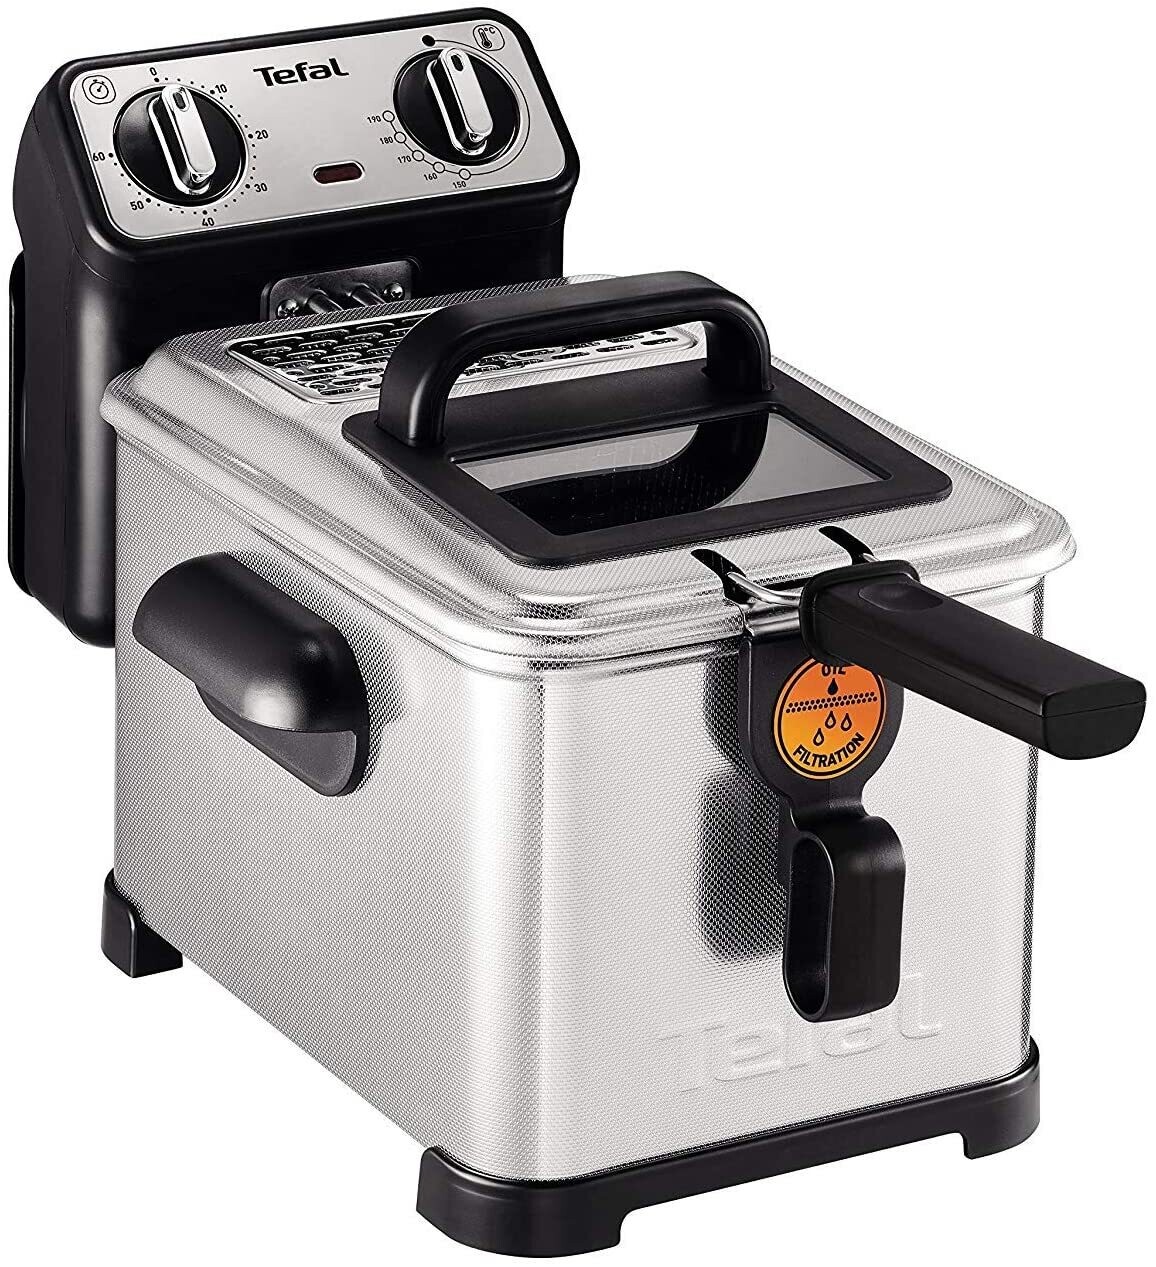 Deep Fryer Filtra Pro Inox and Design, timer, heat-insulated